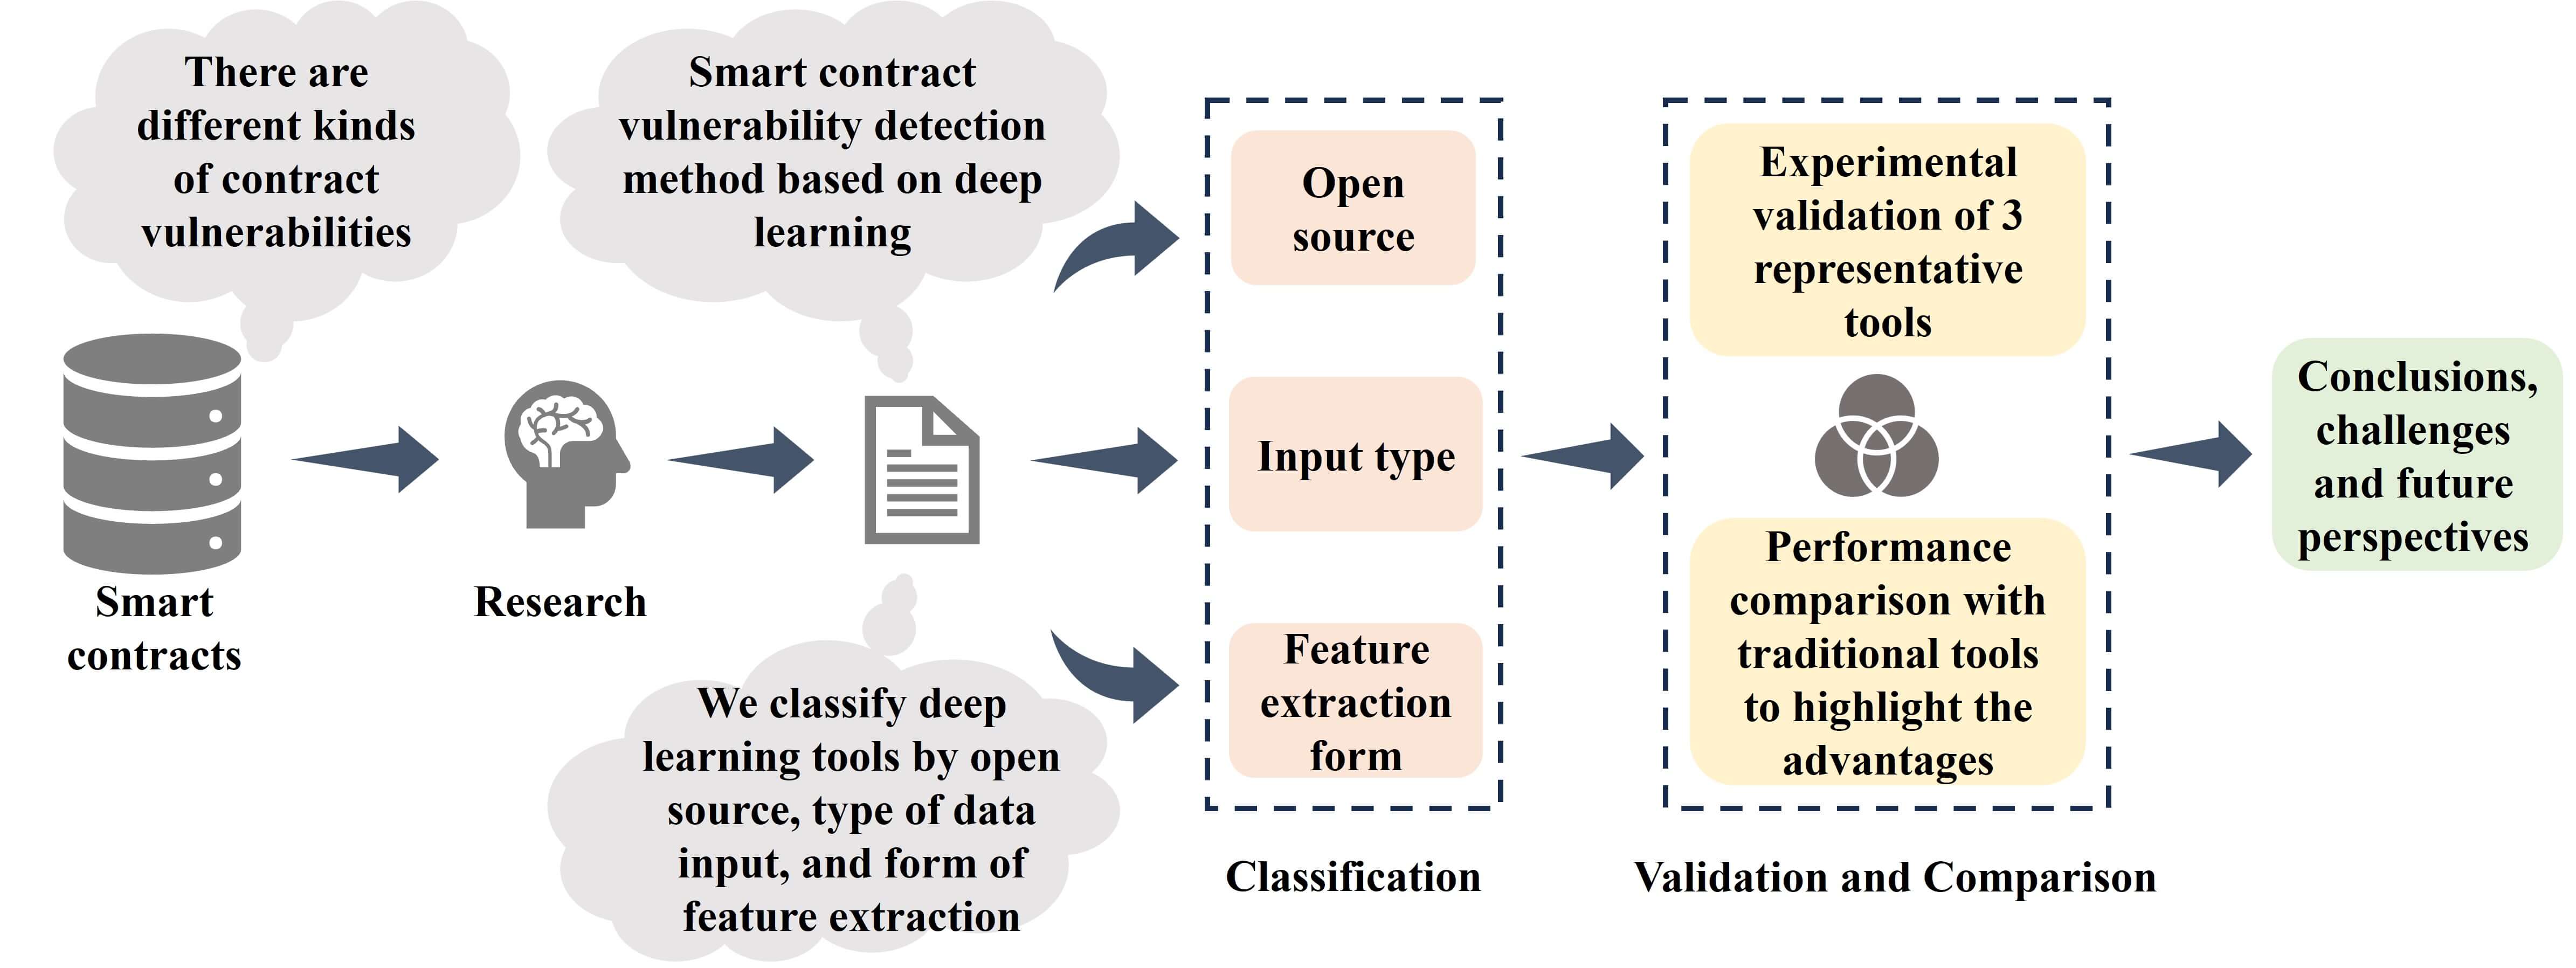 A Review of Deep Learning-Based Vulnerability Detection Tools for Ethernet Smart Contracts